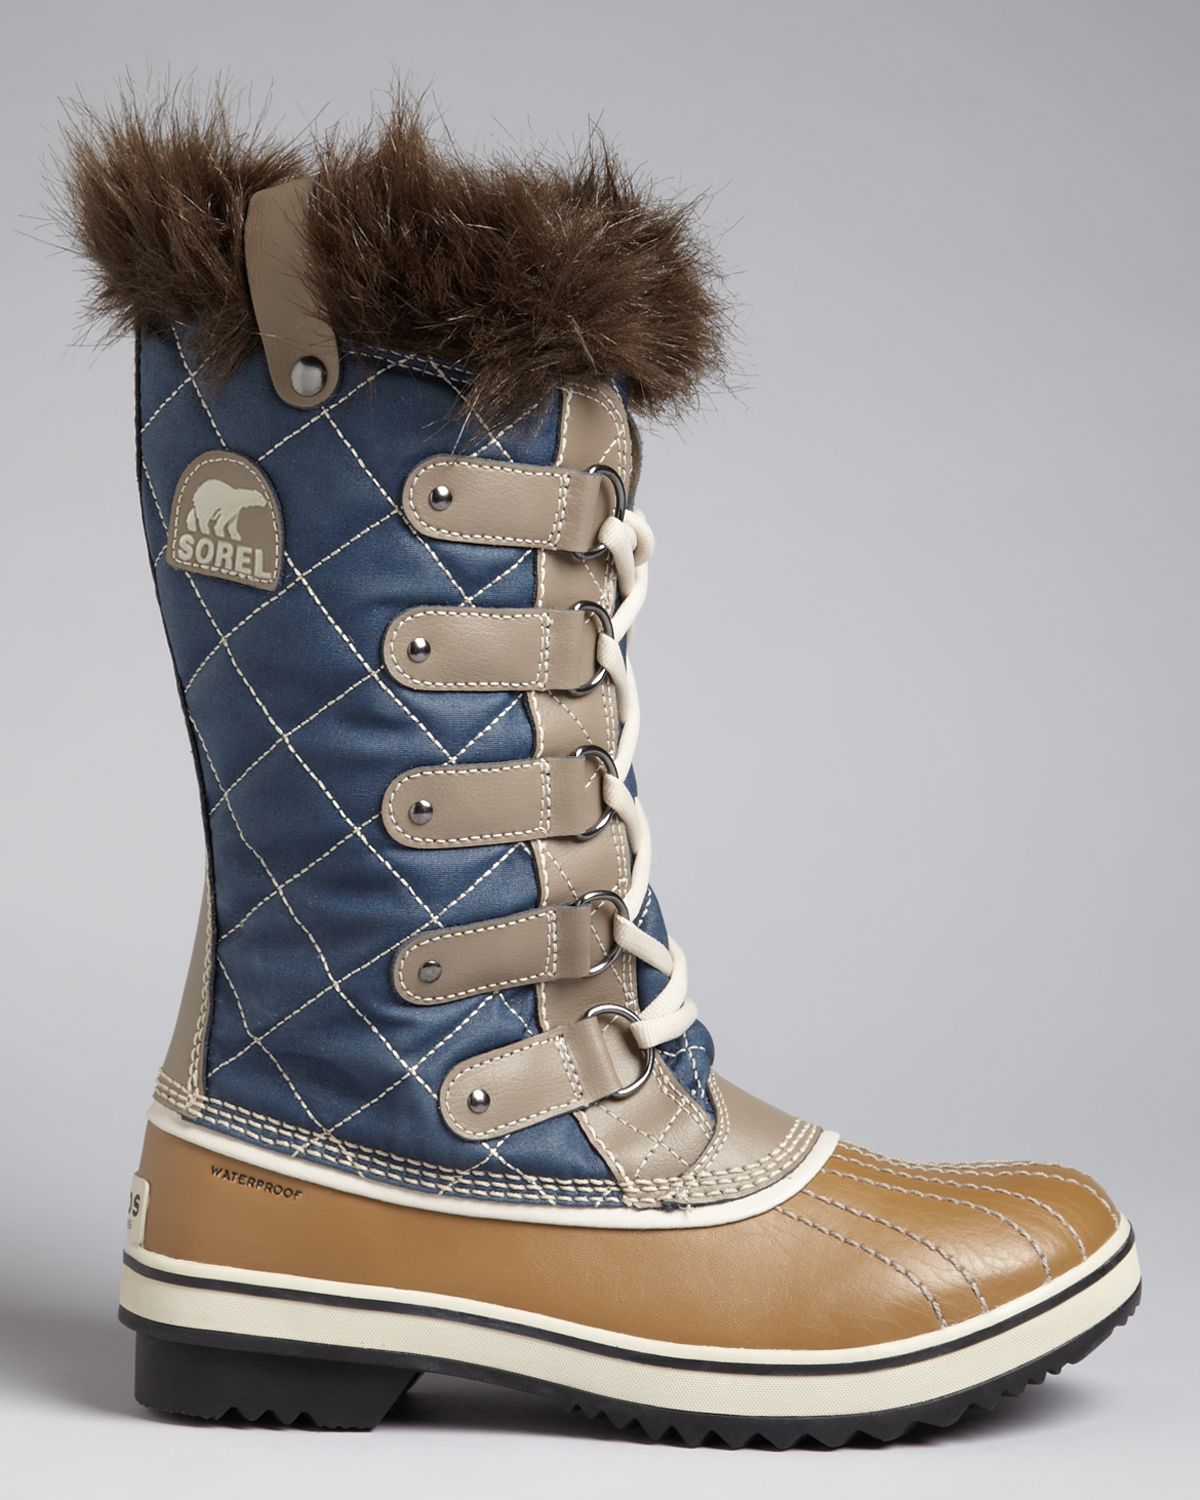 Sorel Cold Weather Lace Up Boots - Tofino in Brown | Lyst